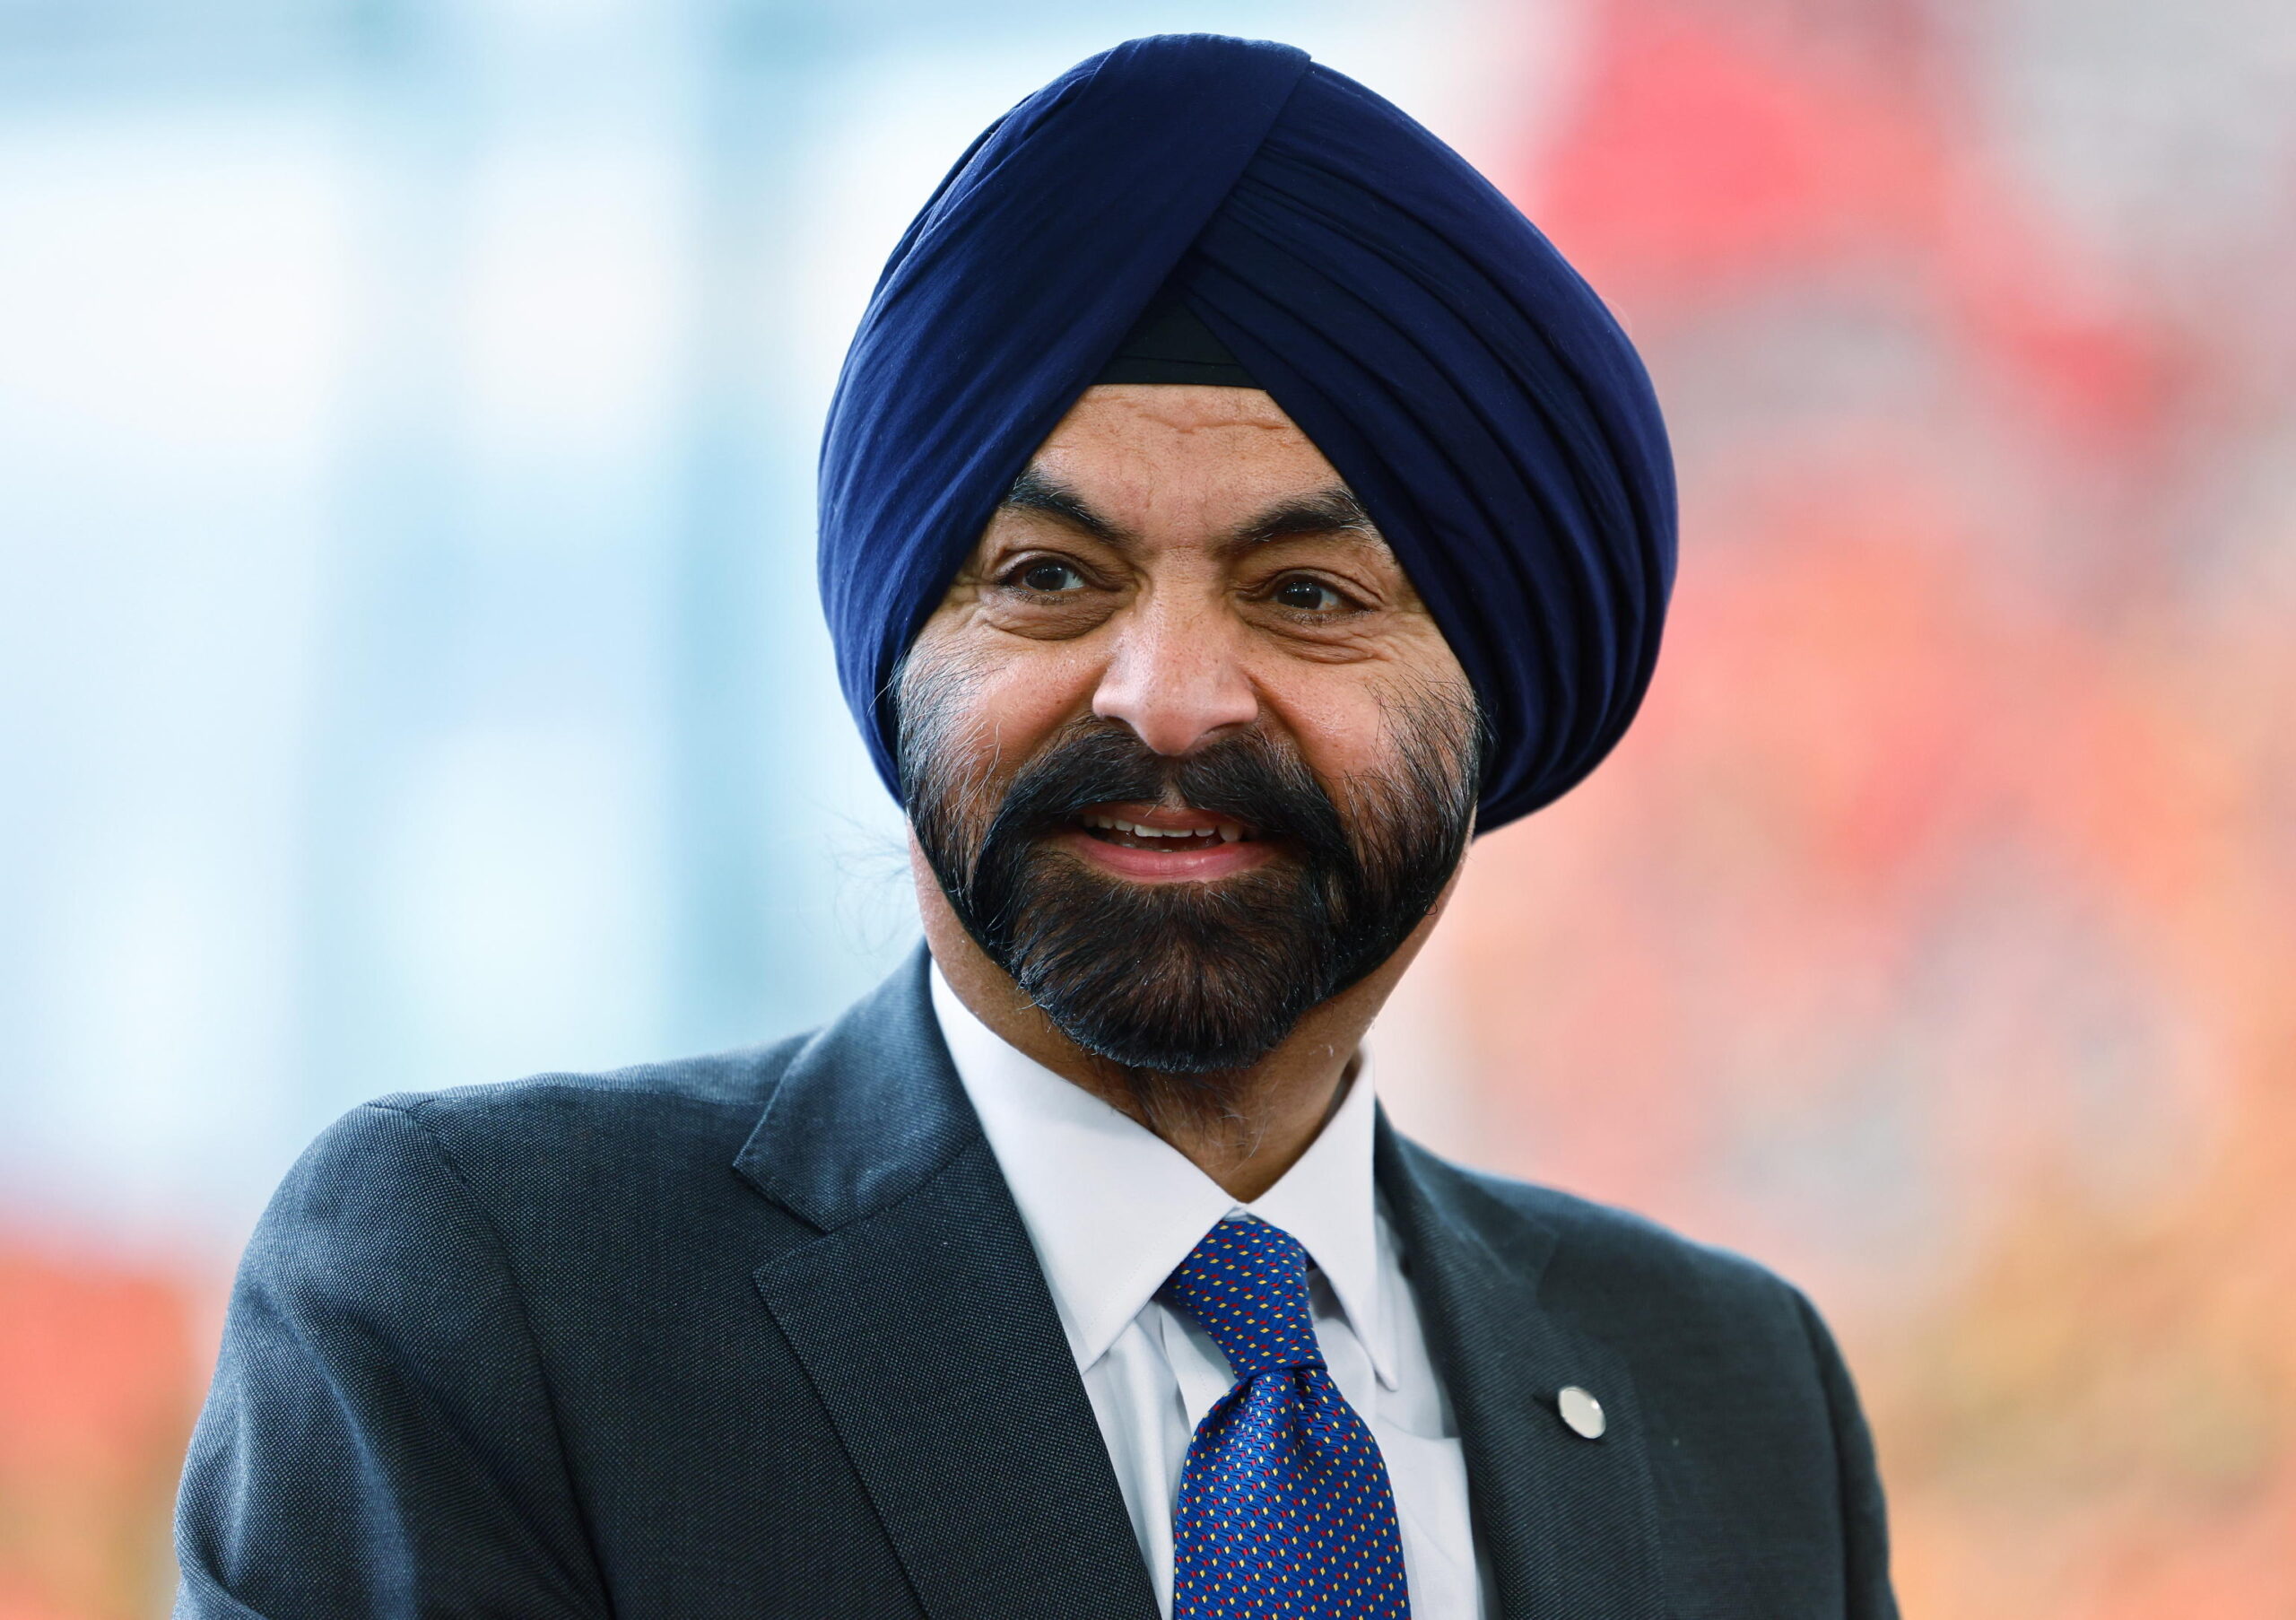 epa10986124 World Bank Group President Ajay Banga arrives for the G20 Compact with Africa (CwA) conference at the Chancellery in Berlin, Germany, 20 November 2023. The 'Compact with Africa' is an initiative that was launched in 2017 under the German G20 presidency. It aims to bring together reform-minded African countries, international organizations and bilateral partners to coordinate development agendas and discuss investments.  EPA/HANNIBAL HANSCHKE